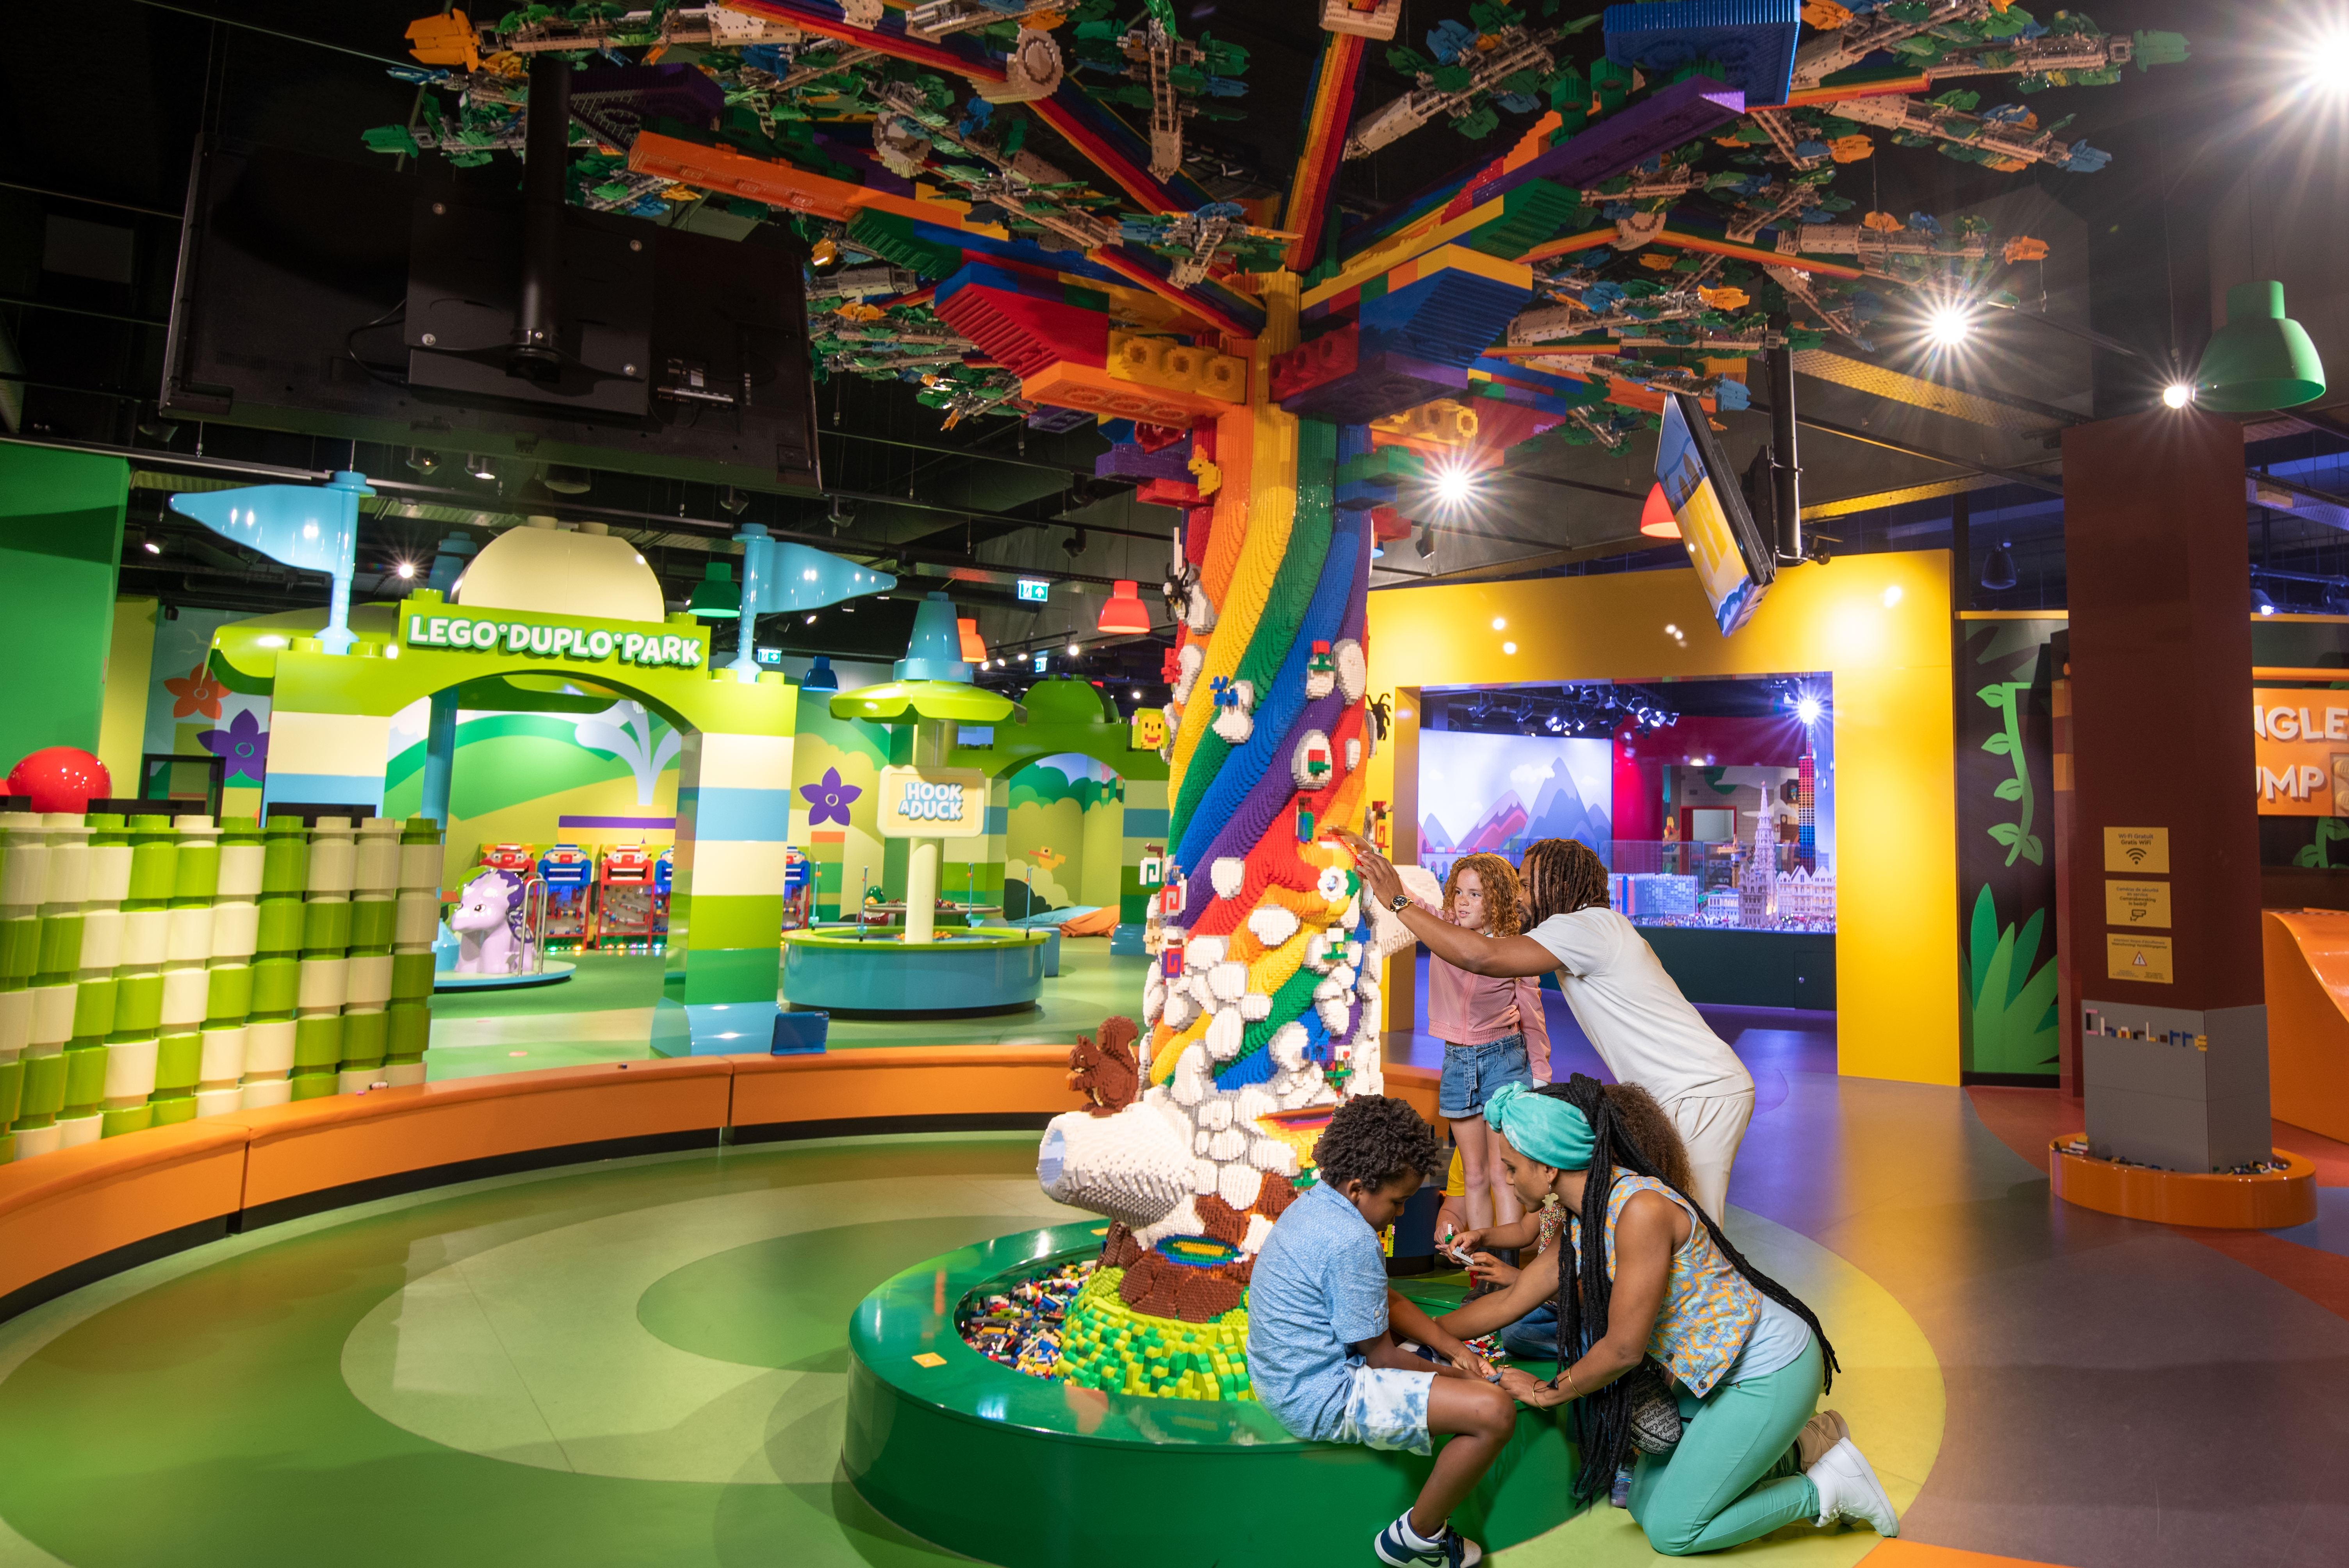 LEGOLAND Discovery Center - Annual Pass Options